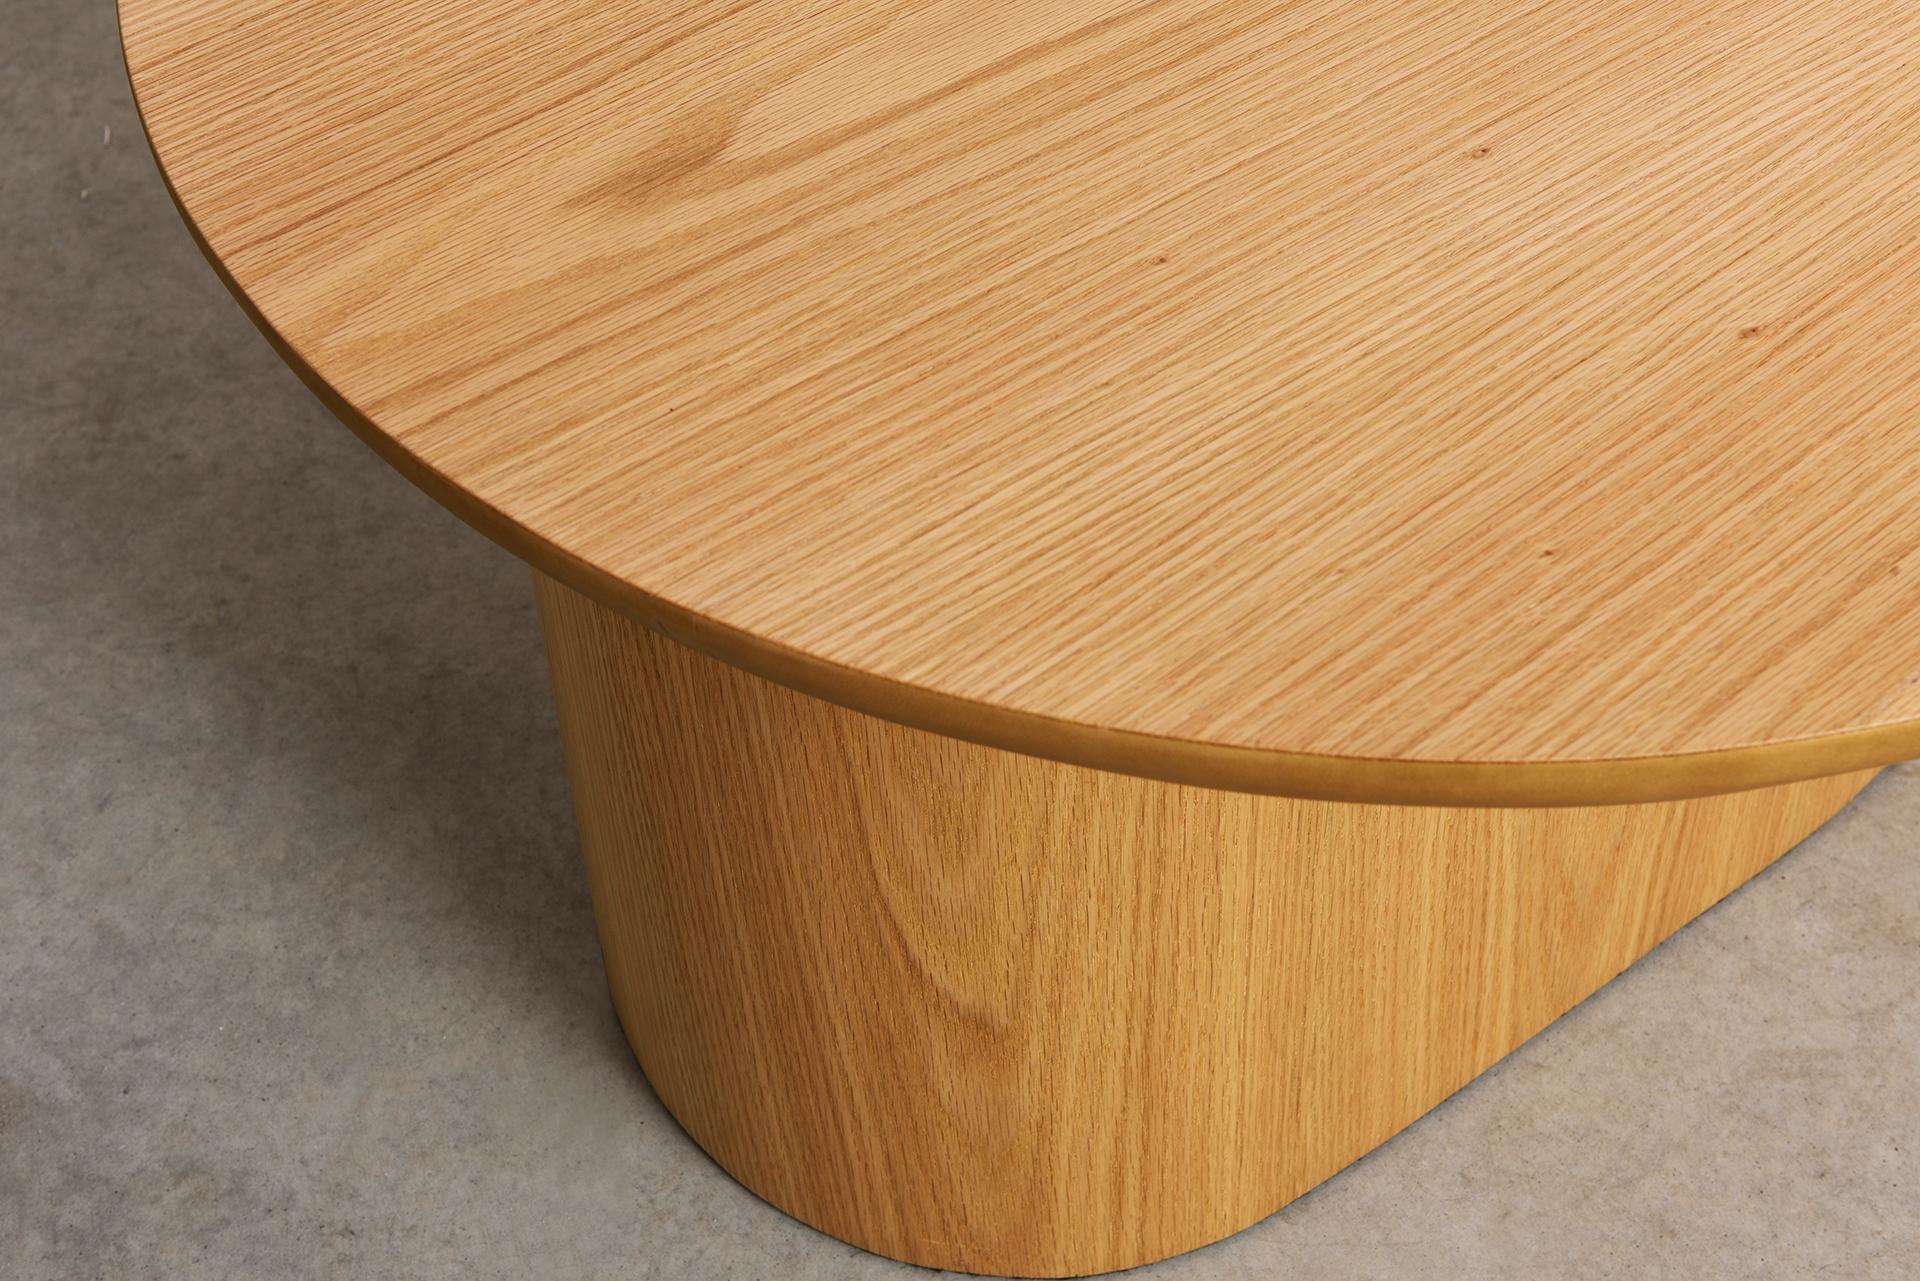 Porto Set Center Table, by Rain, Contemporary Center Table, Laminated Oakwood In New Condition For Sale In Sao Paulo, SP